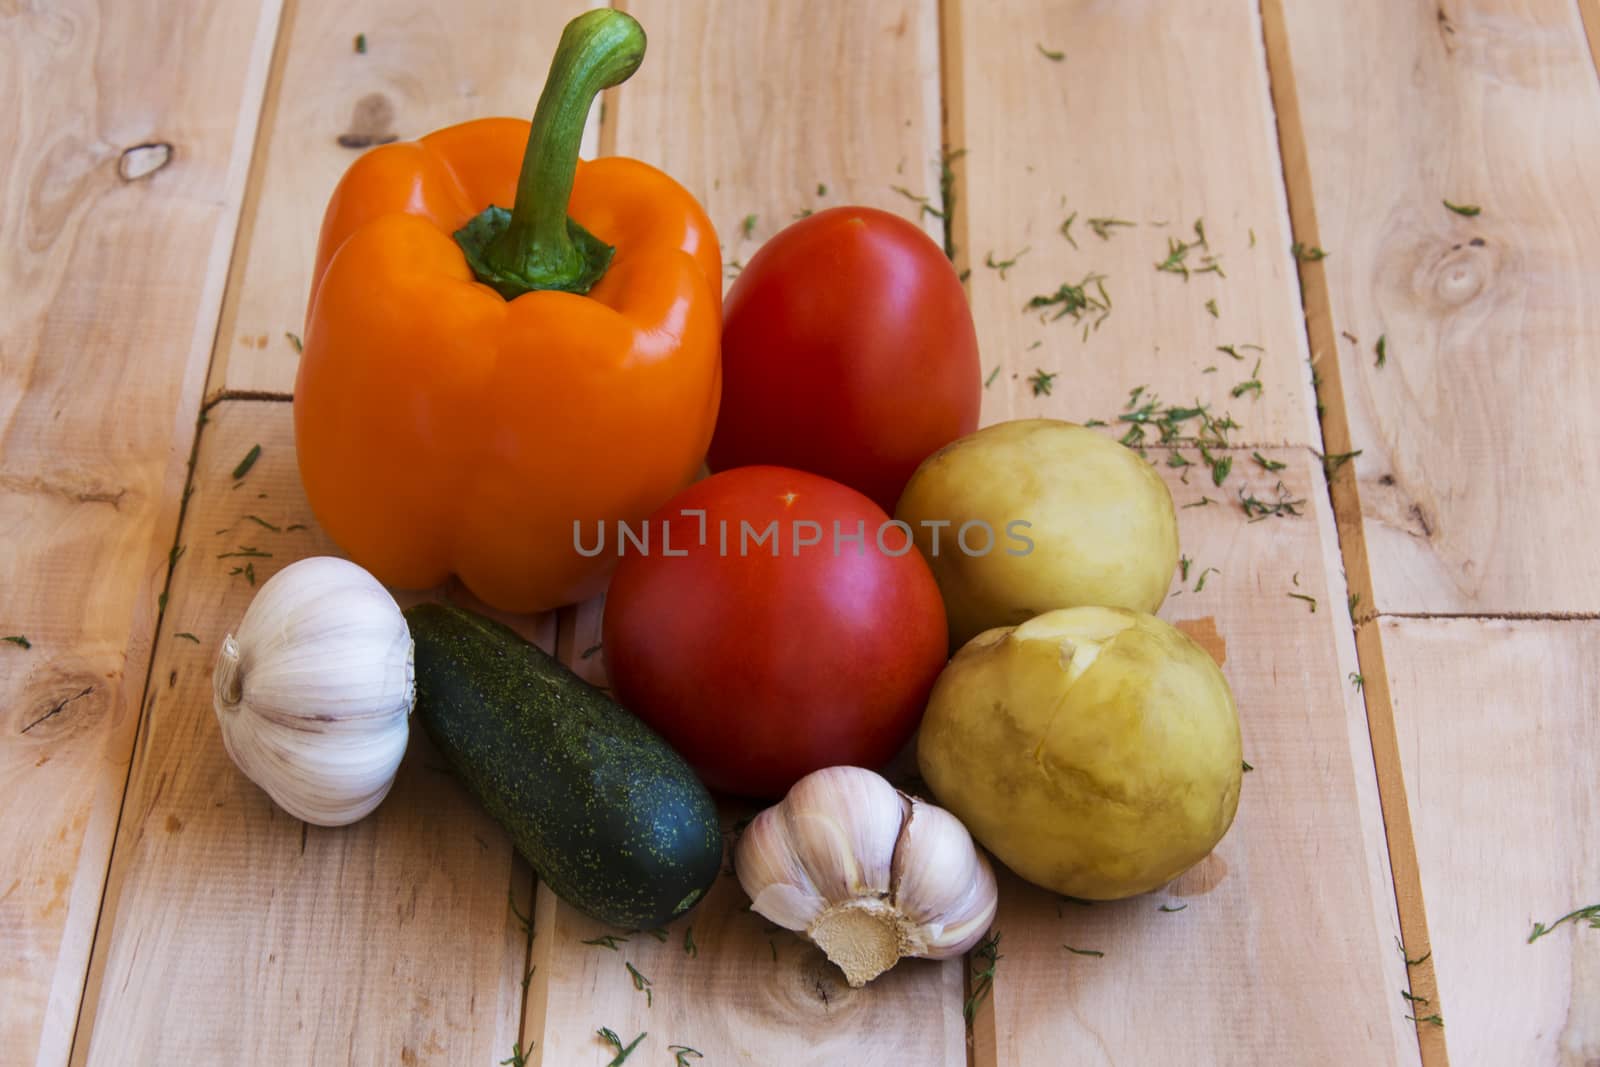 Summer vegetables on a wooden surface



